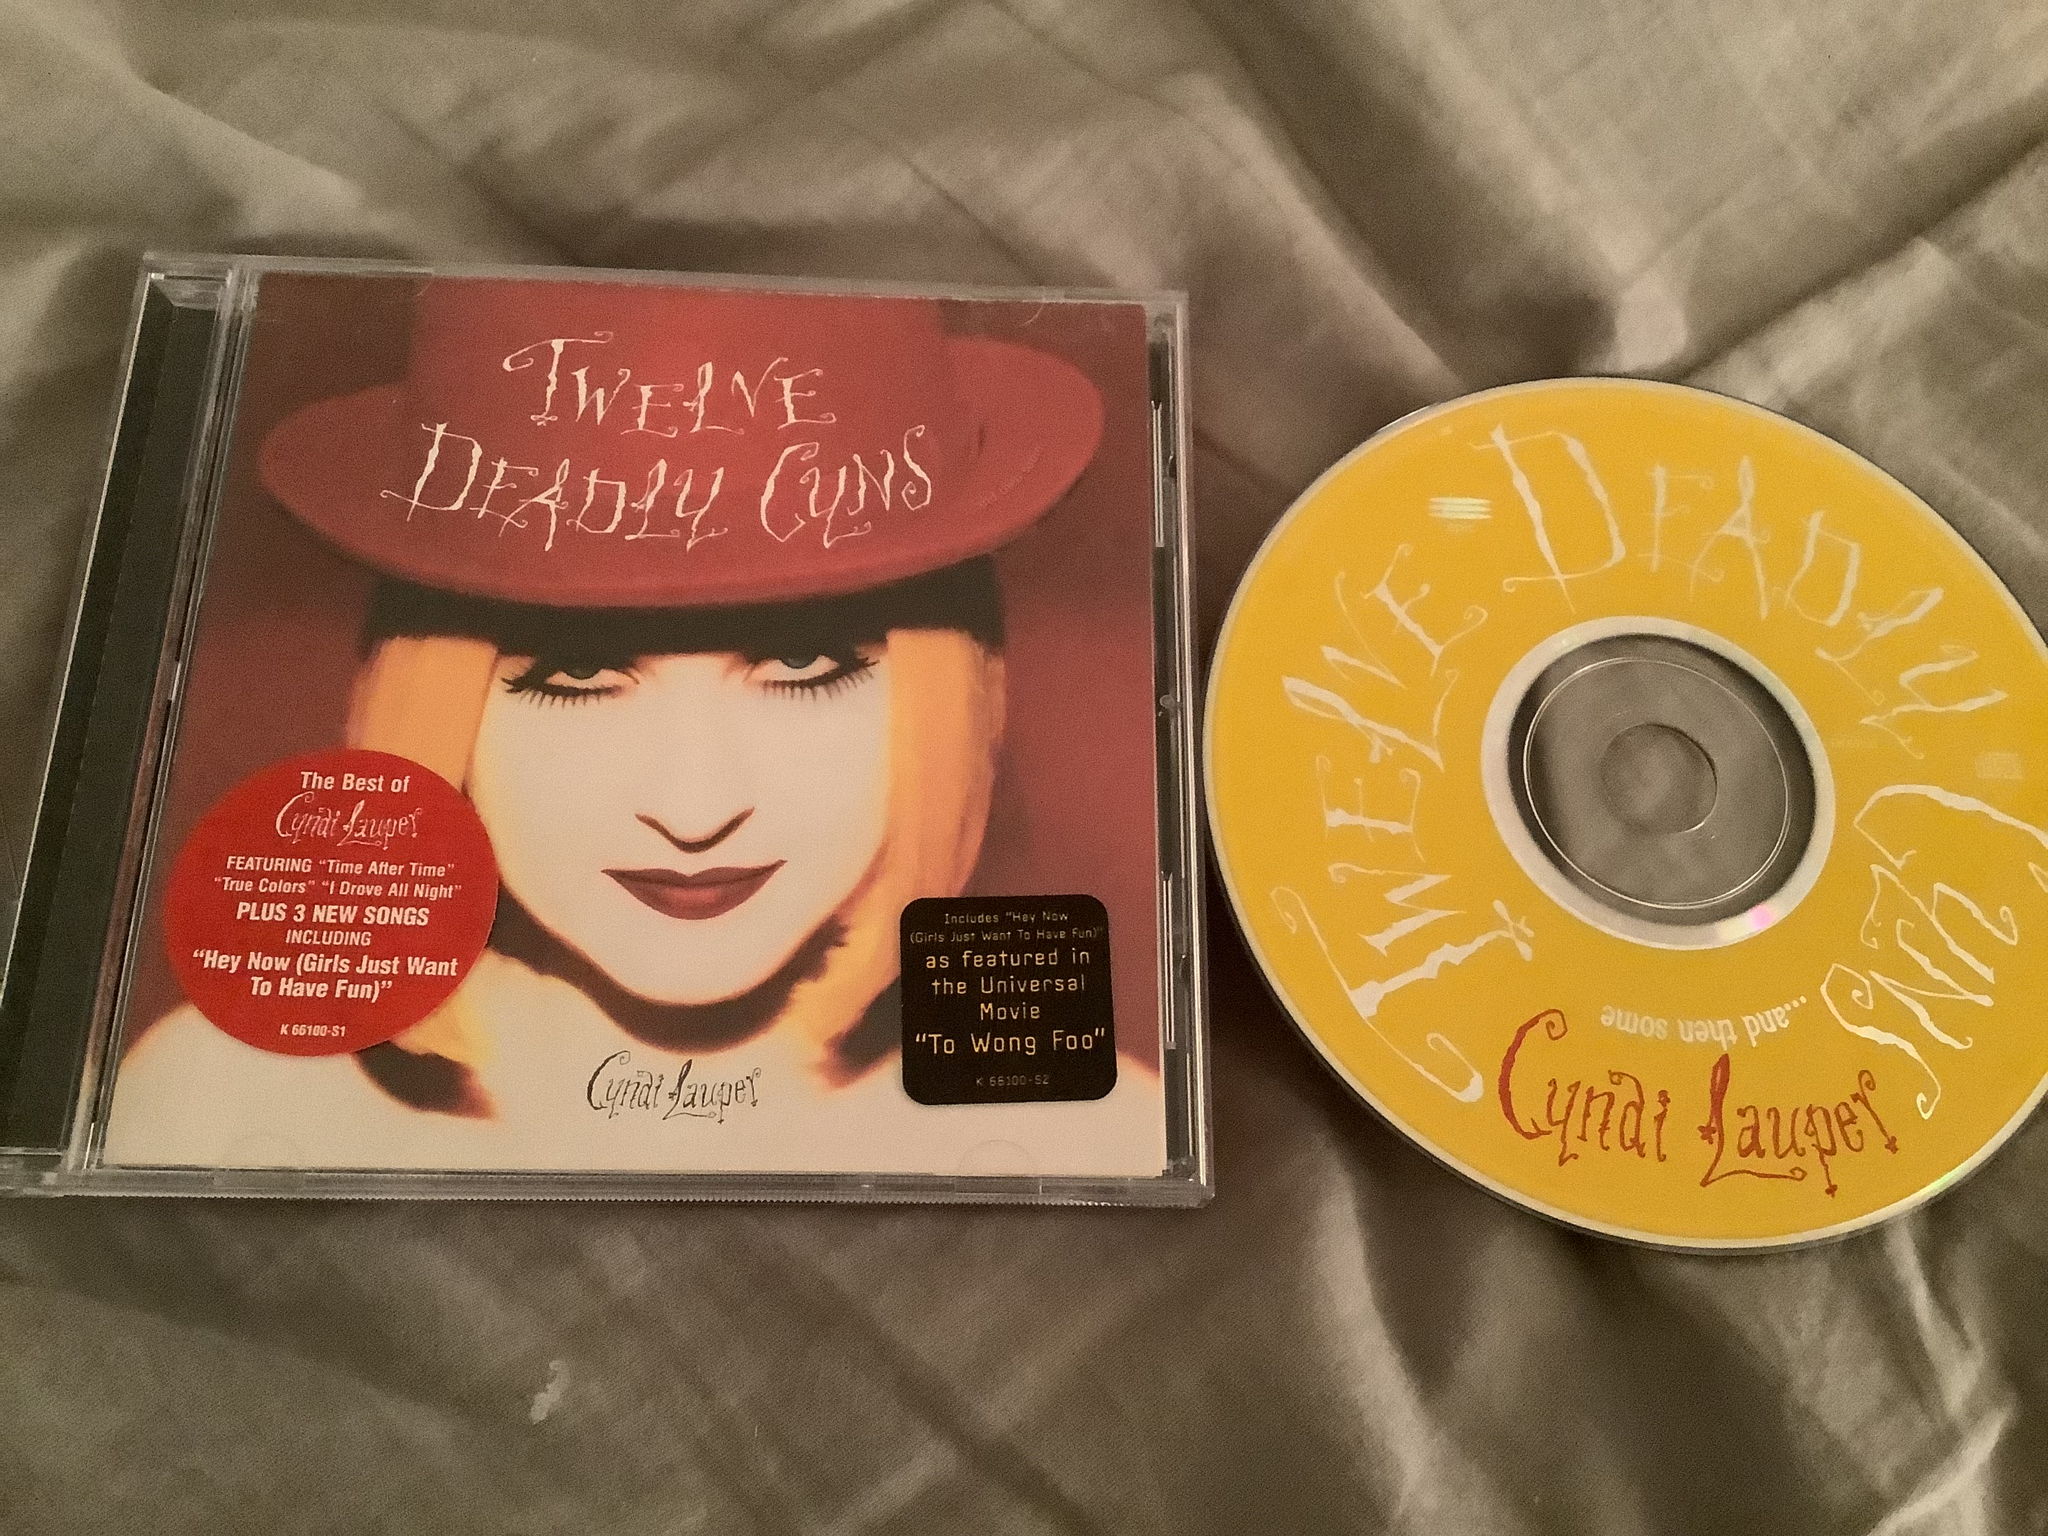 Cyndi Lauper Twelve Deadly Cyns…And More